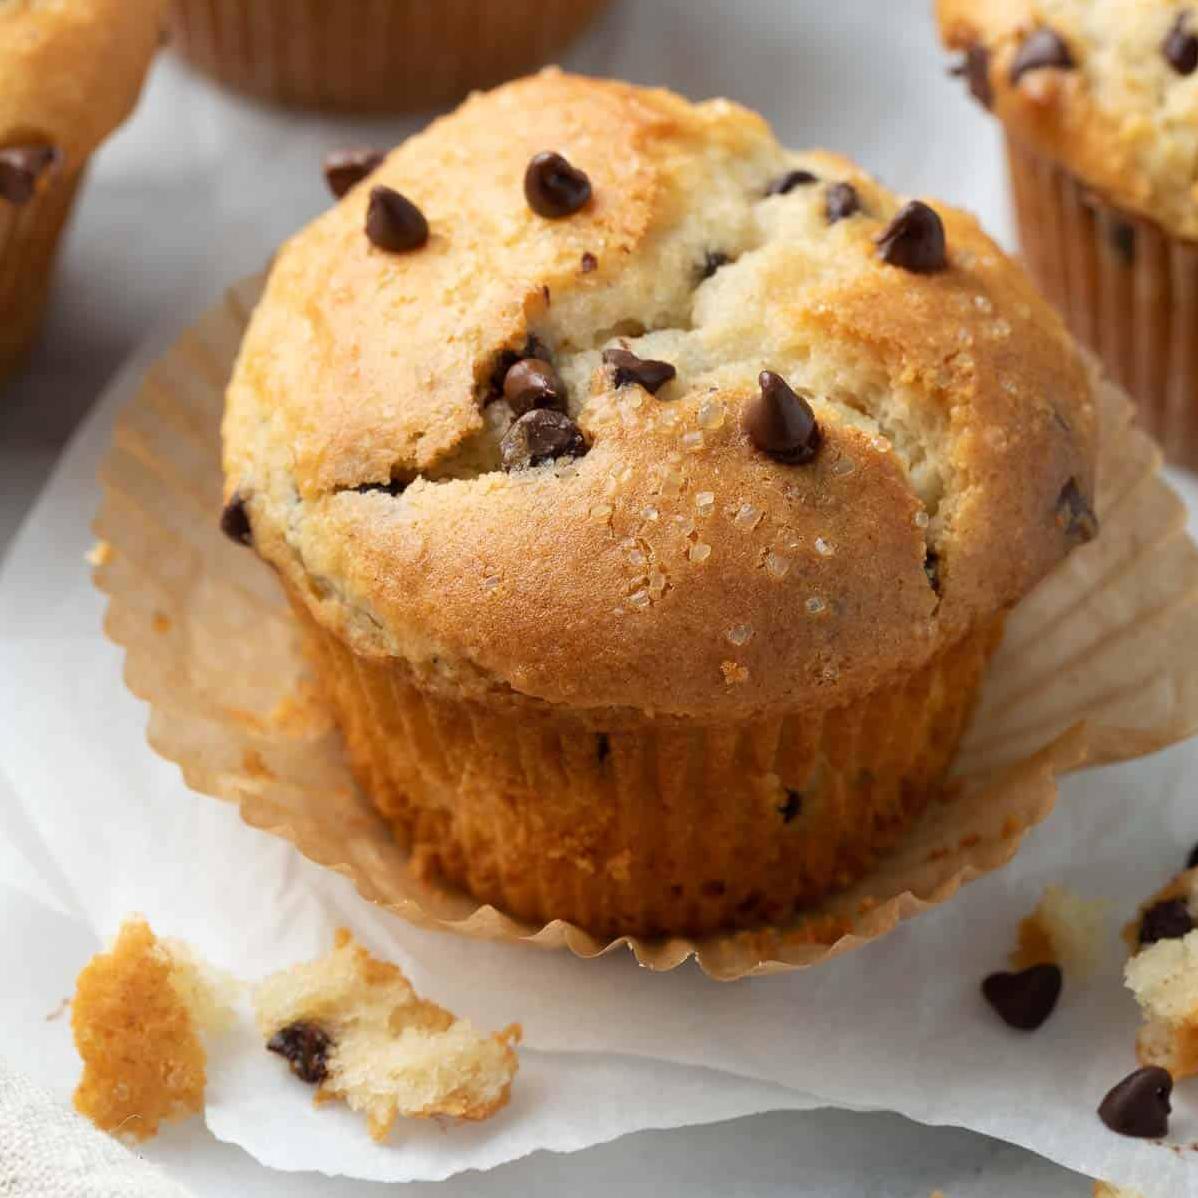  Crunchy and crumbly, these gluten-free chocolate chip muffins are just what you need with your coffee or tea.